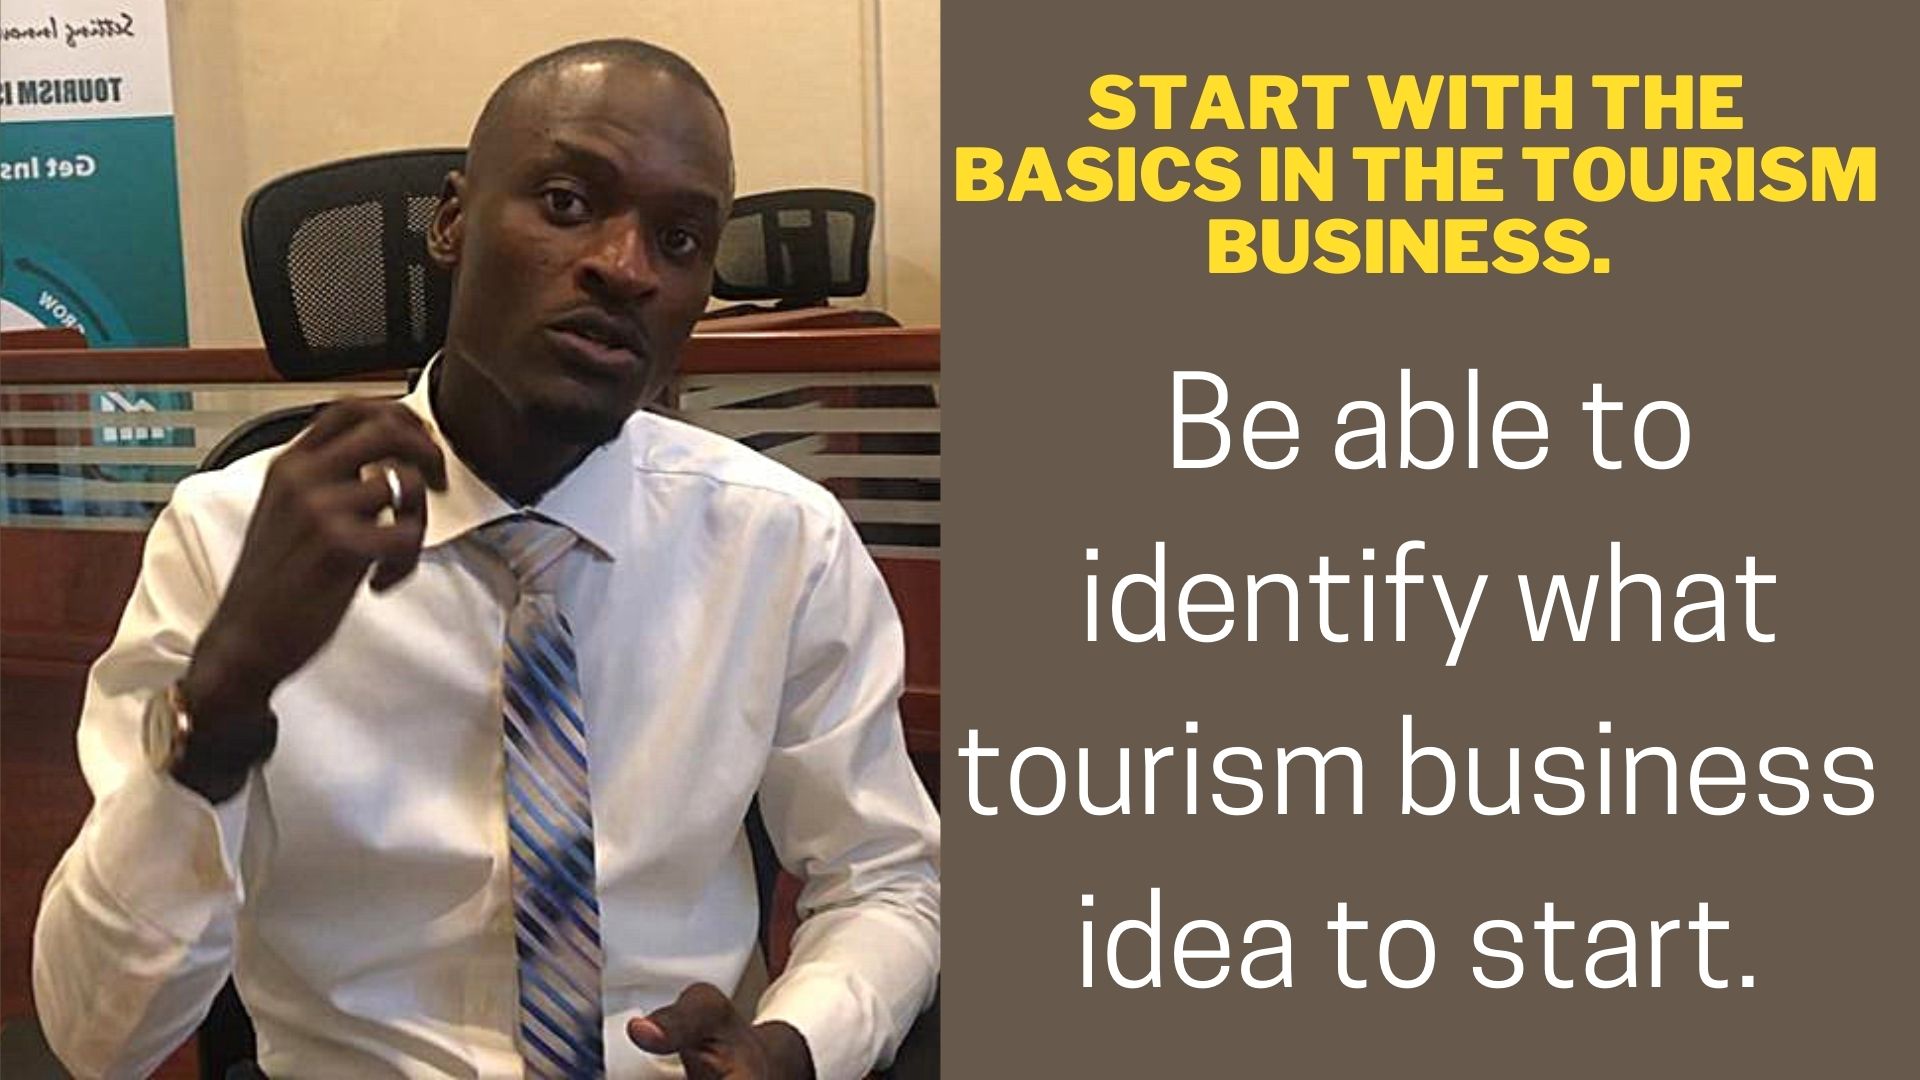 To Identify What Tourism Business Idea To Start